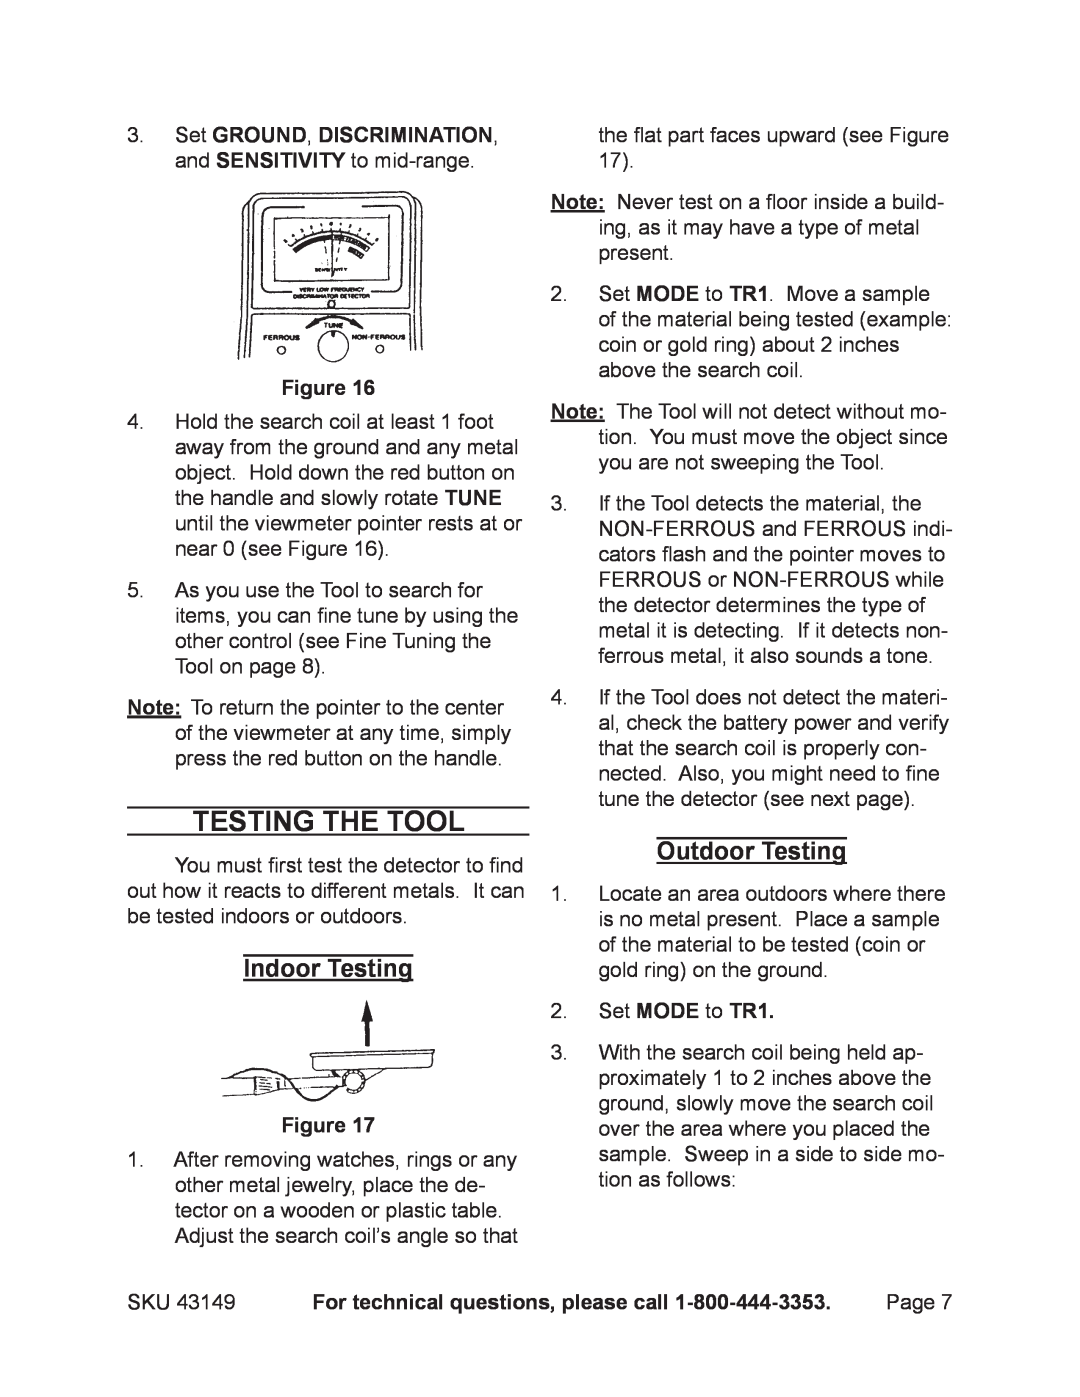 Harbor Freight Tools 43149 operating instructions Testing the Tool, Indoor Testing, Outdoor Testing, Set MODE to TR1 